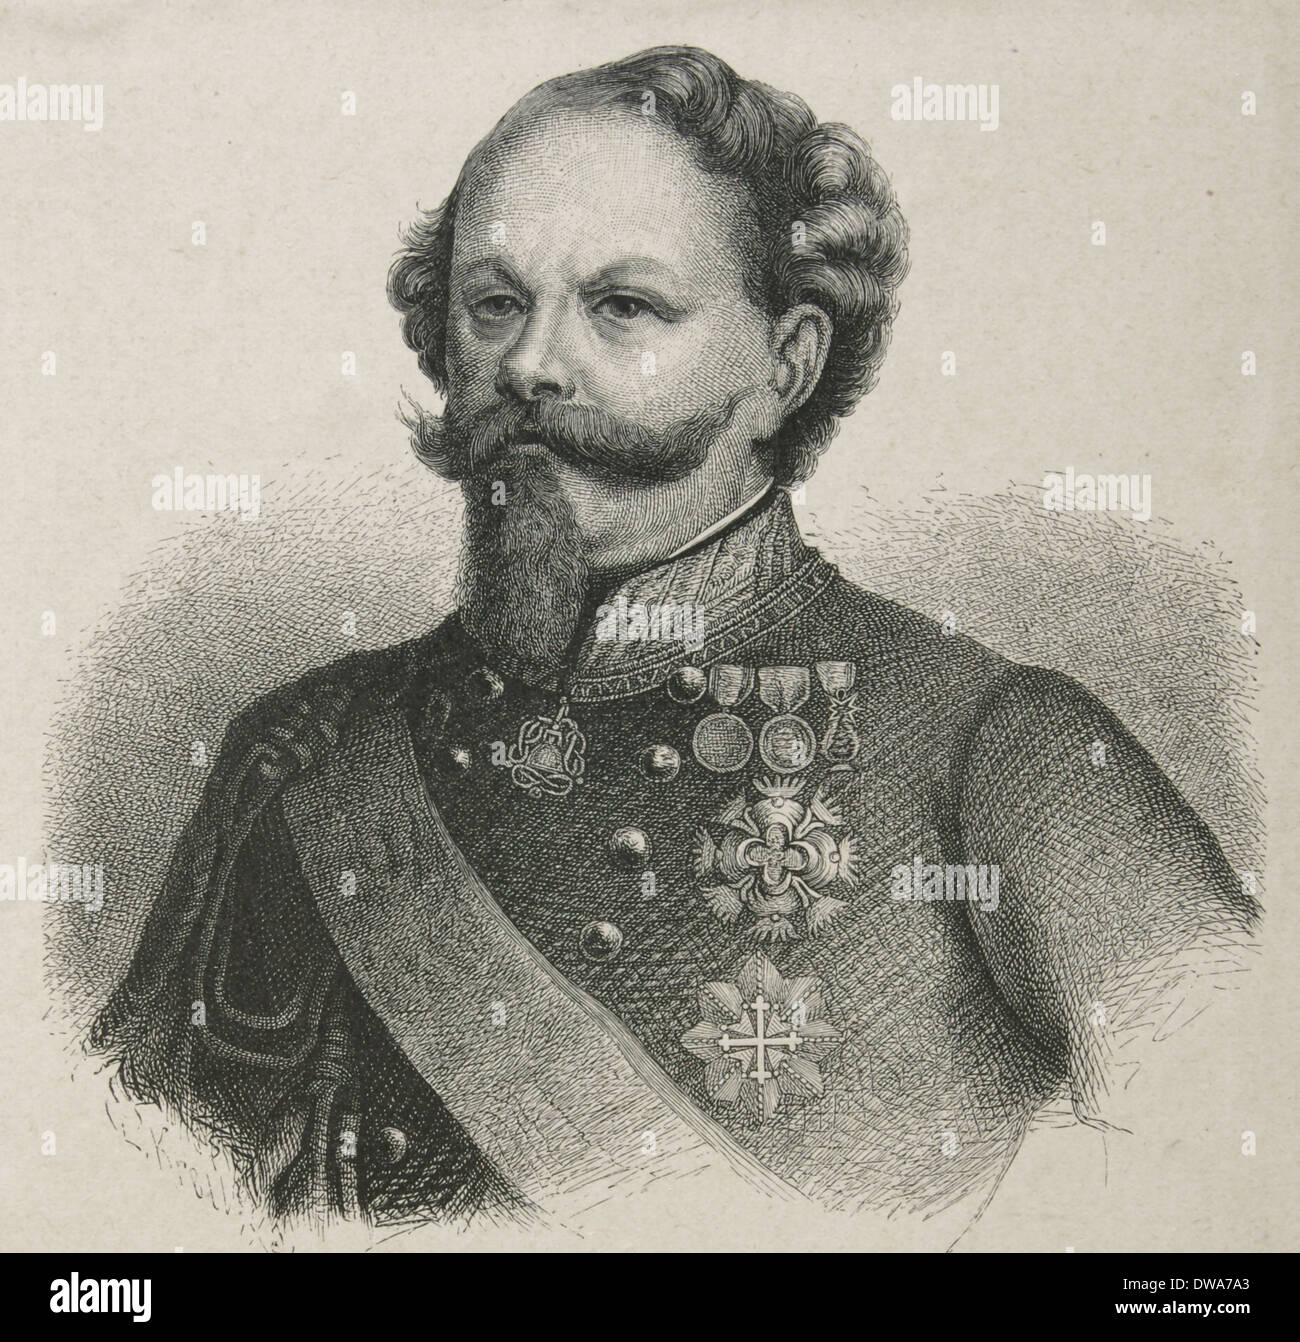 Victor Emmanuel II of Italy (1820-1878). King of Sardinia from 1849-1861, and King of Italy (1861-1878). Engraving by E. Krell Stock Photo